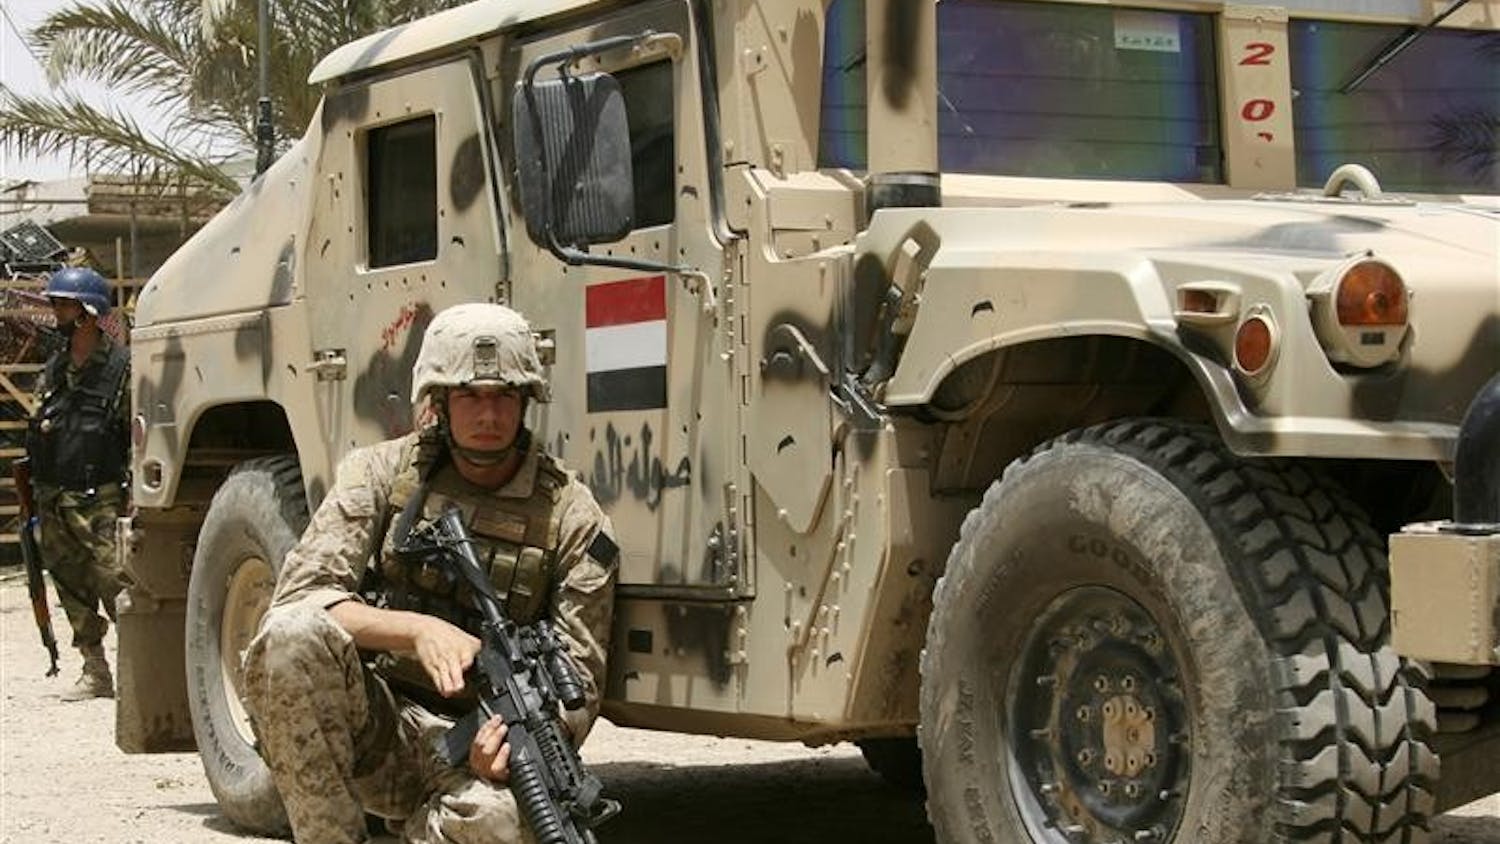 In this Thursday, June 19, 2008 file photo, a U.S. Marine takes cover behind an Iraqi Army humvee during the beginning of combat operations in Amarah, Iraq, 200 miles southeast of Baghdad. The United States will withdraw most of its troops from Iraq by August 2010, 19 months after President Barack Obama's inauguration day, according to administration officials who expect Obama to make the announcement on Friday.